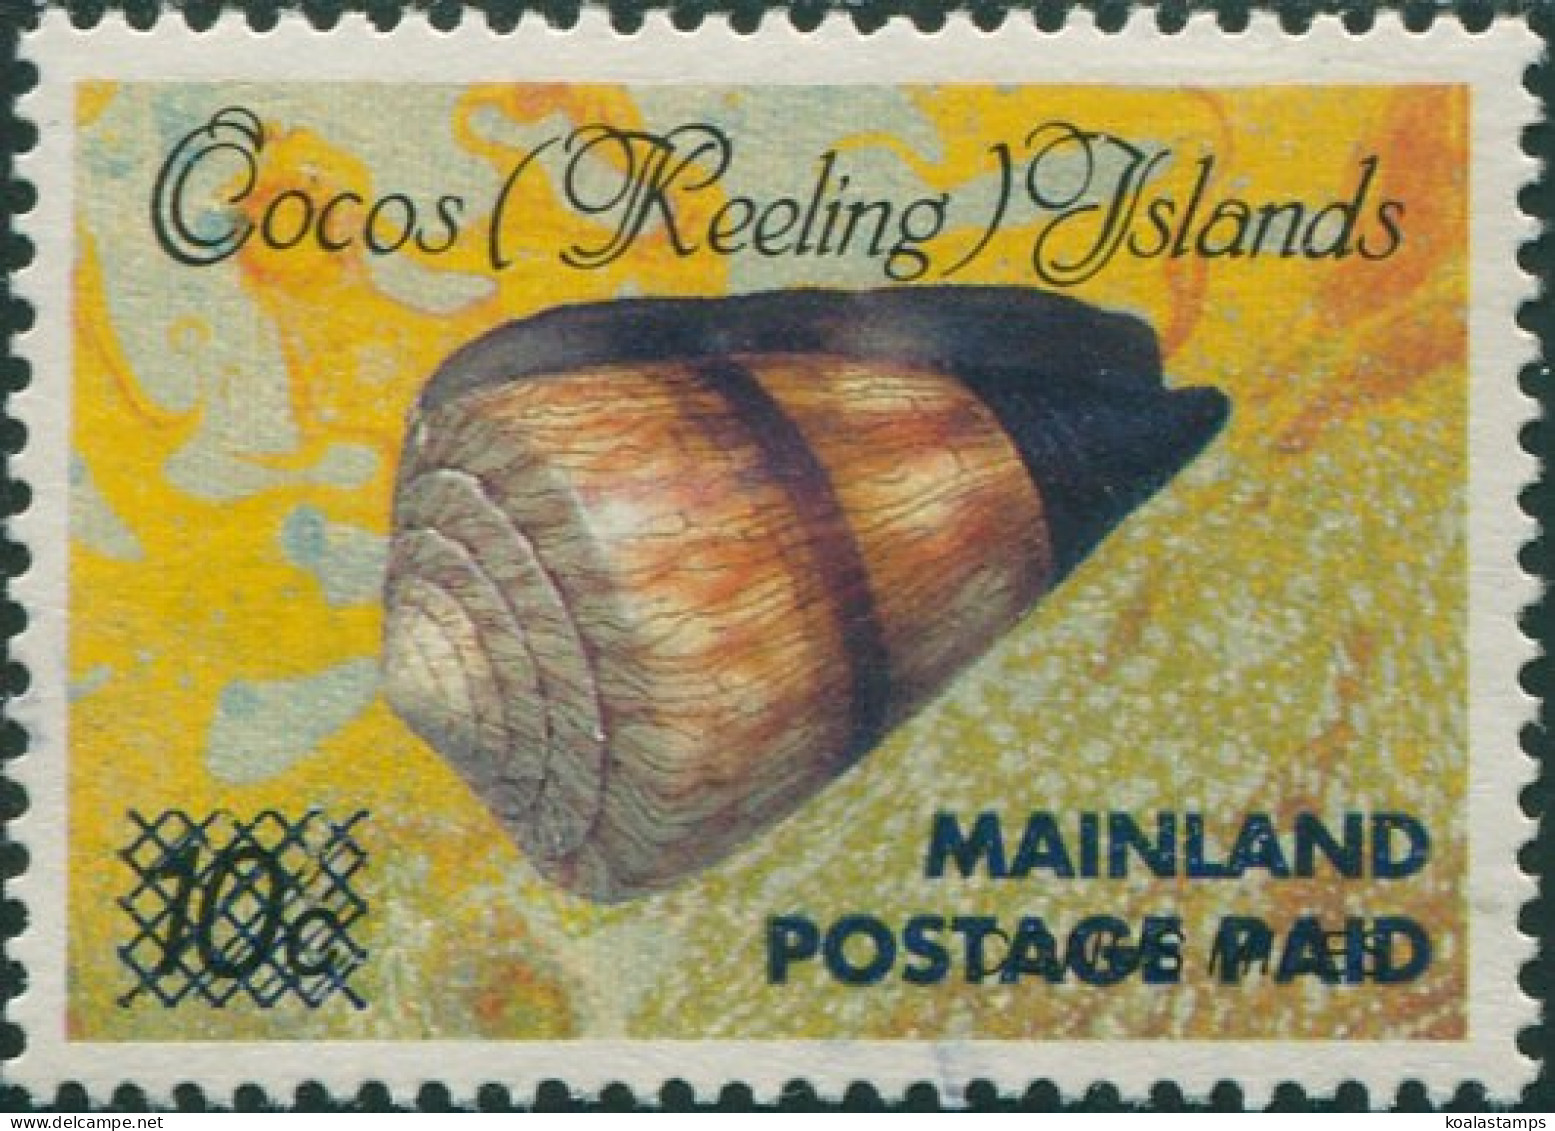 Cocos Islands 1990 SG235 POSTAGE PAID Cone Shell MNH - Cocos (Keeling) Islands